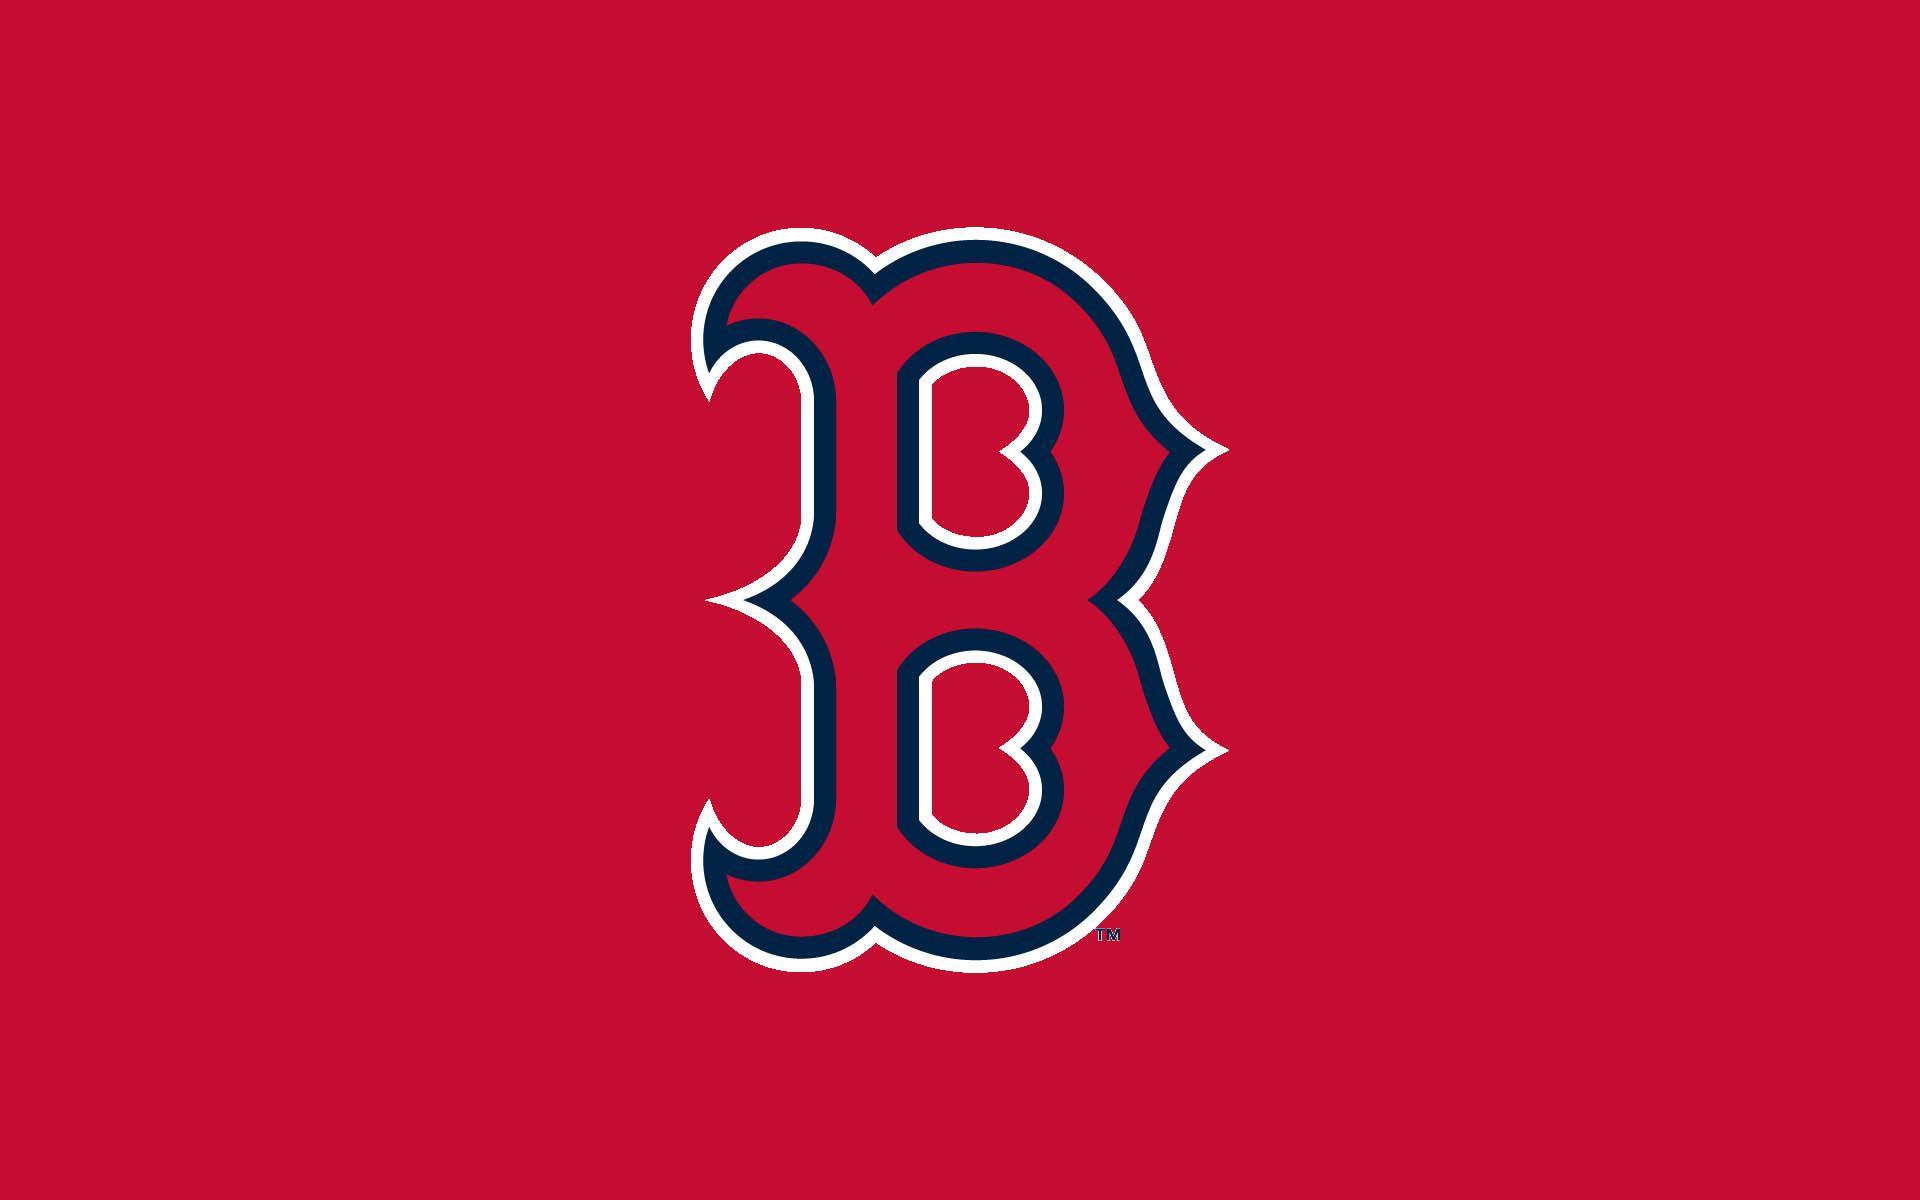 Red Sox Wallpapers